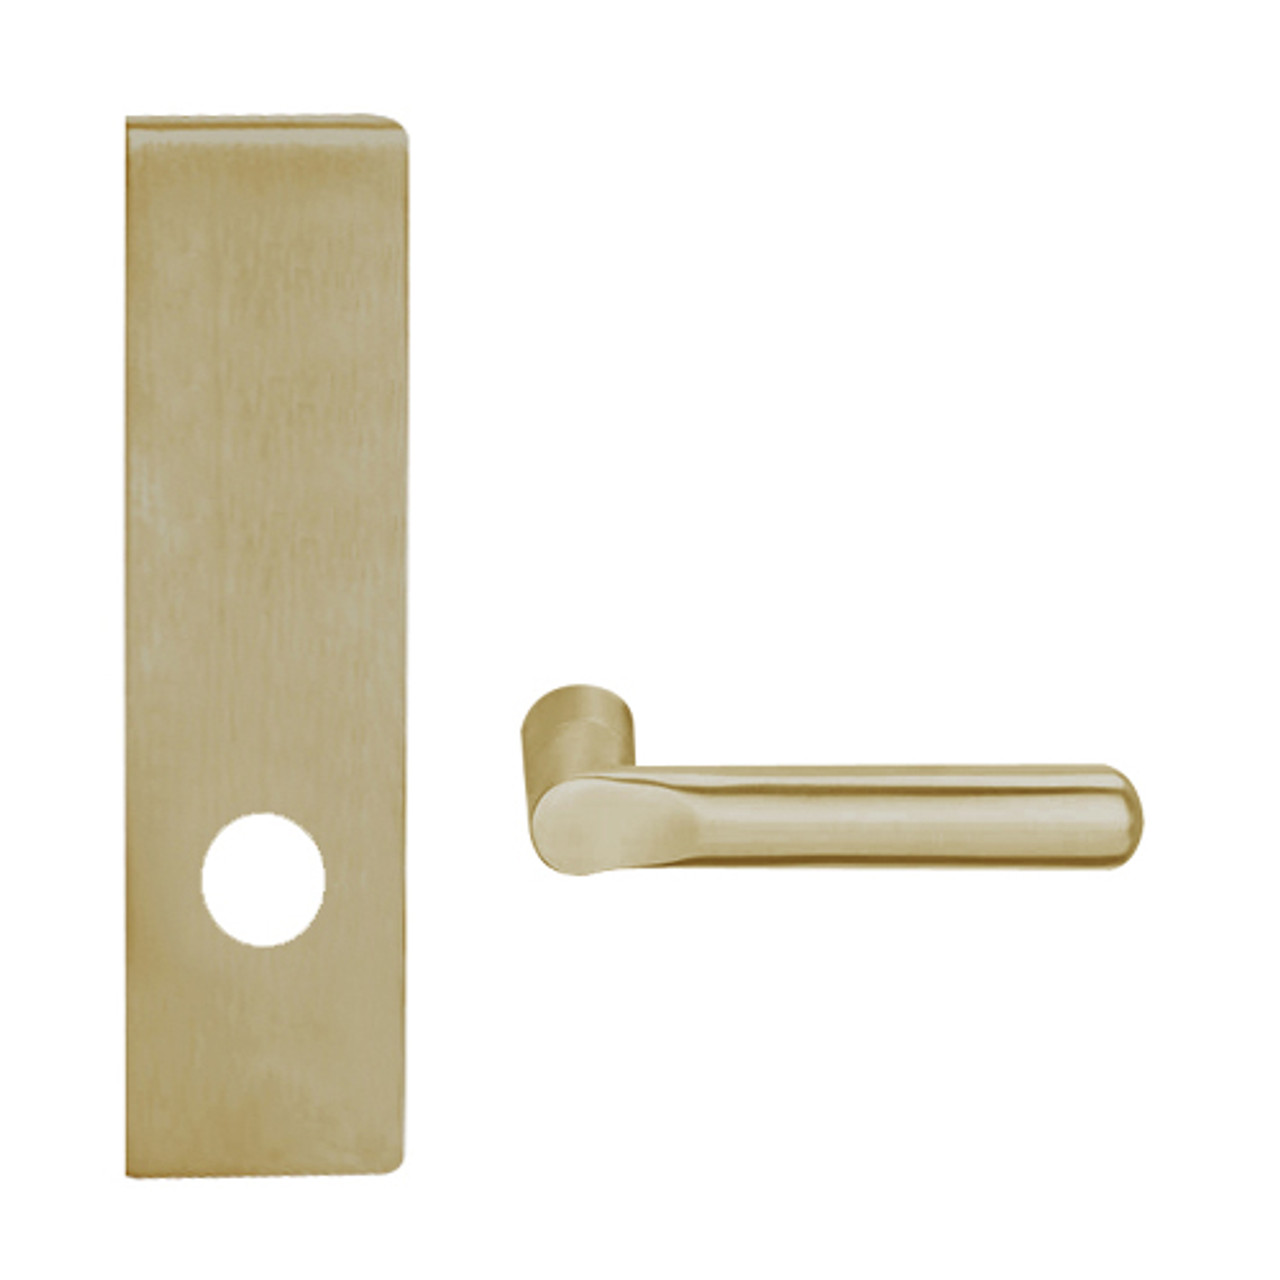 L0172-18N-613 Schlage L Series Double Dummy Trim Commercial Mortise Lock with 18 Cast Lever Design in Oil Rubbed Bronze